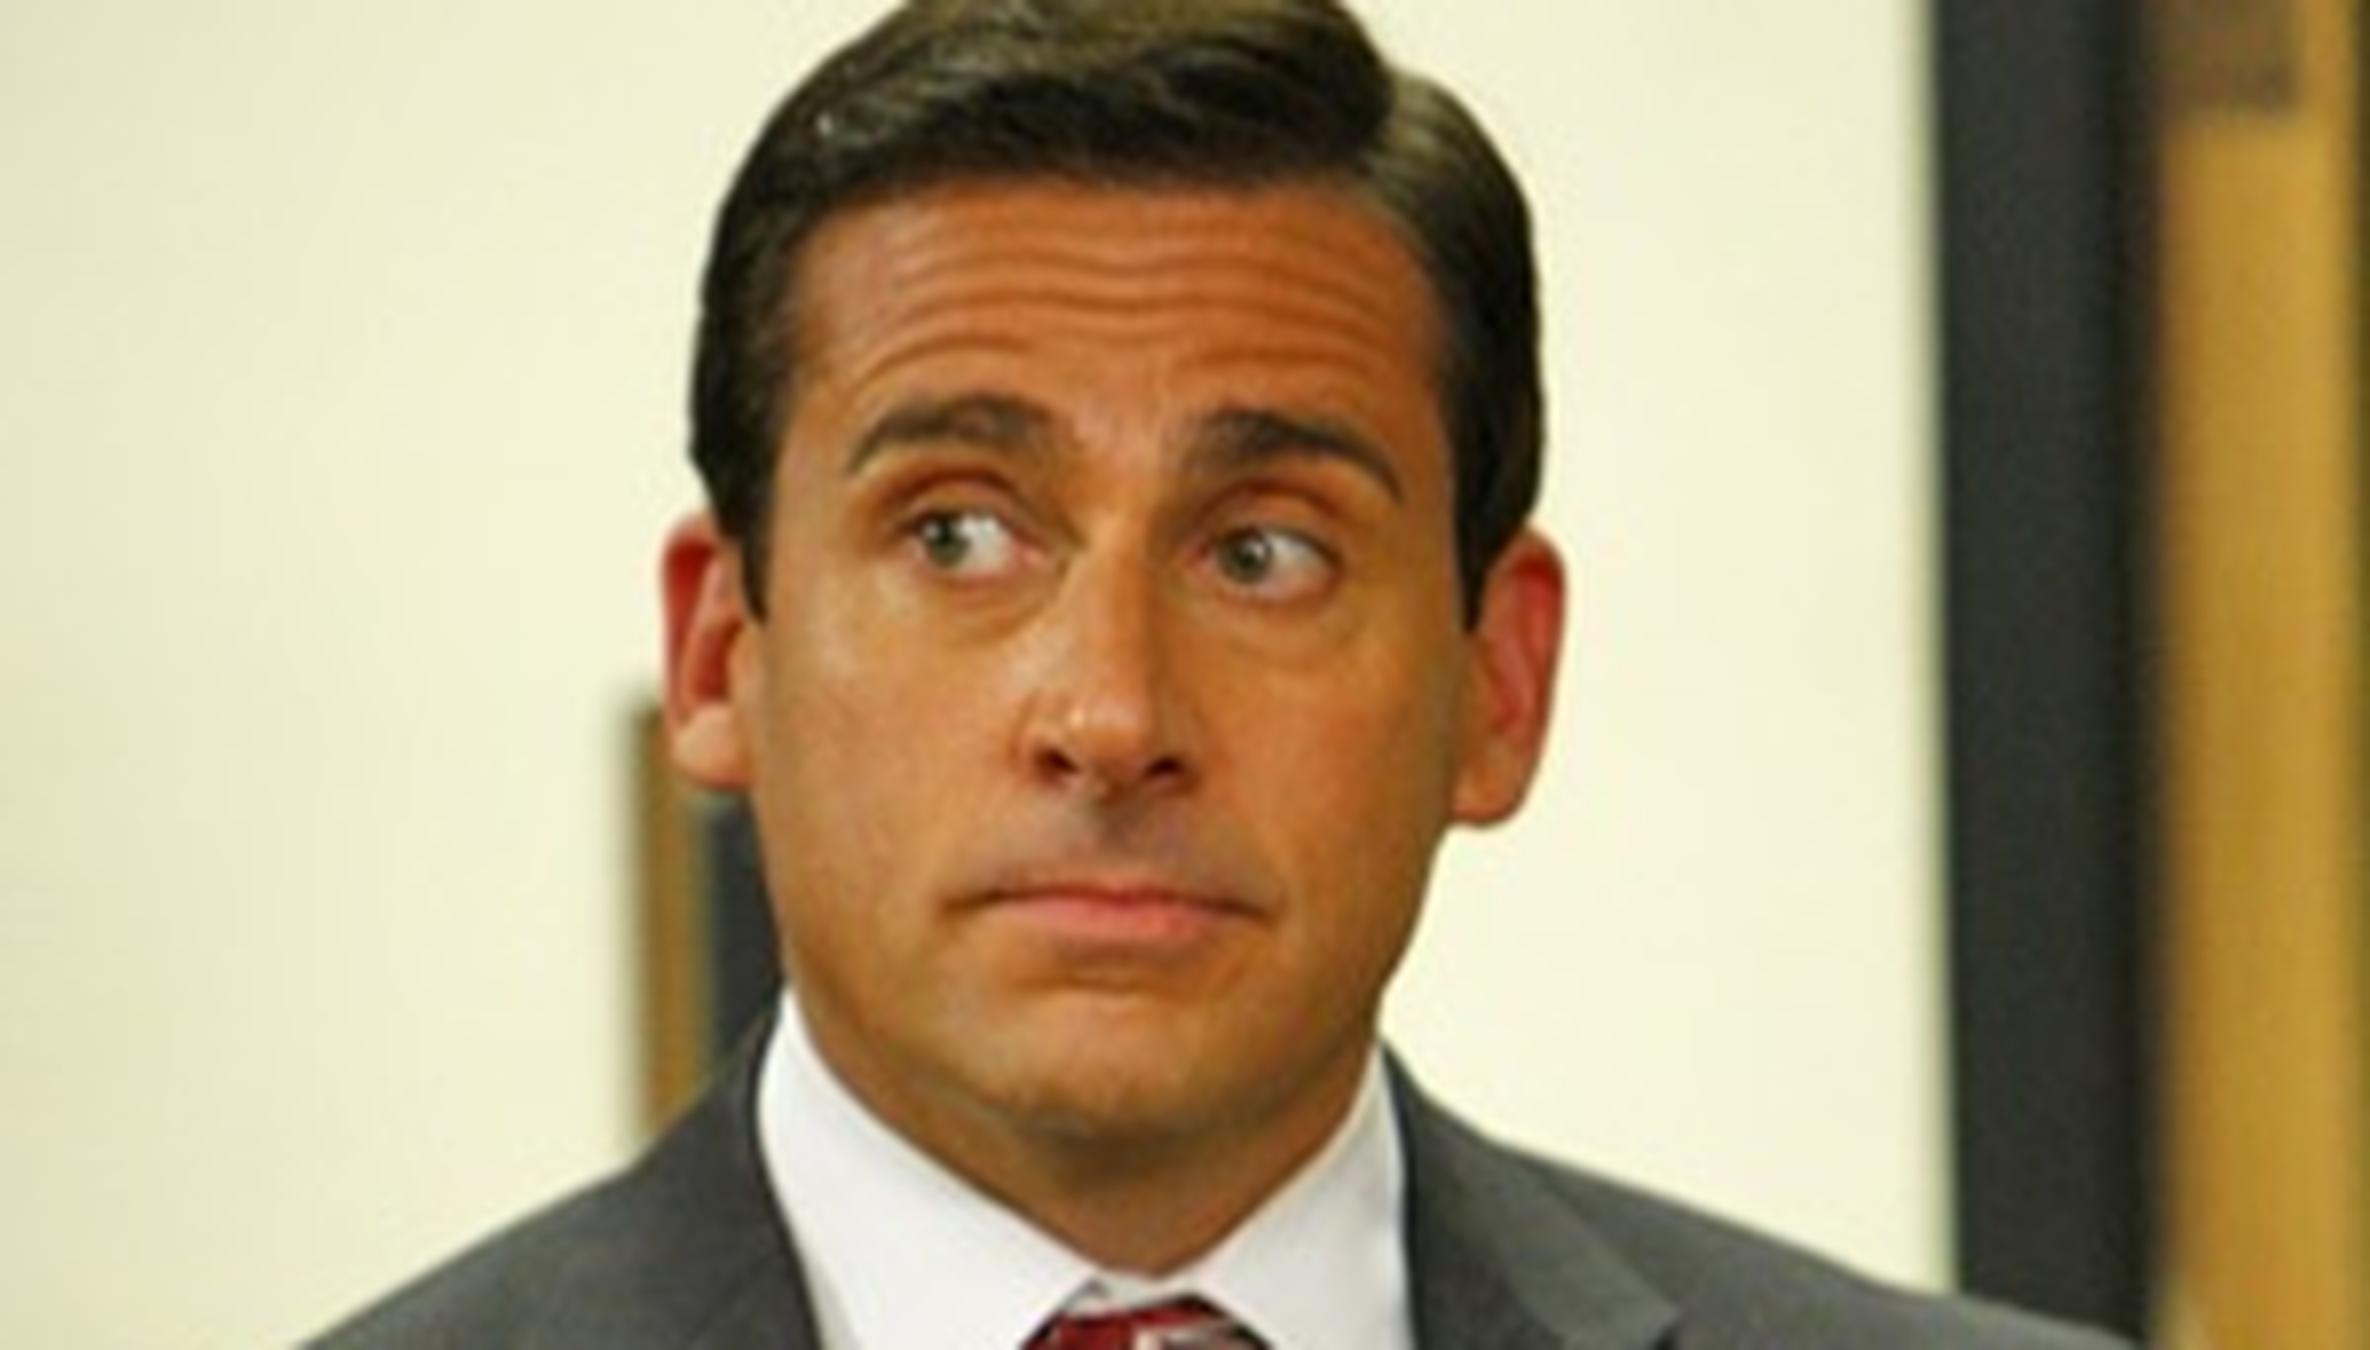 Steve Carell Leaves 'The Office' After 7 Seasons